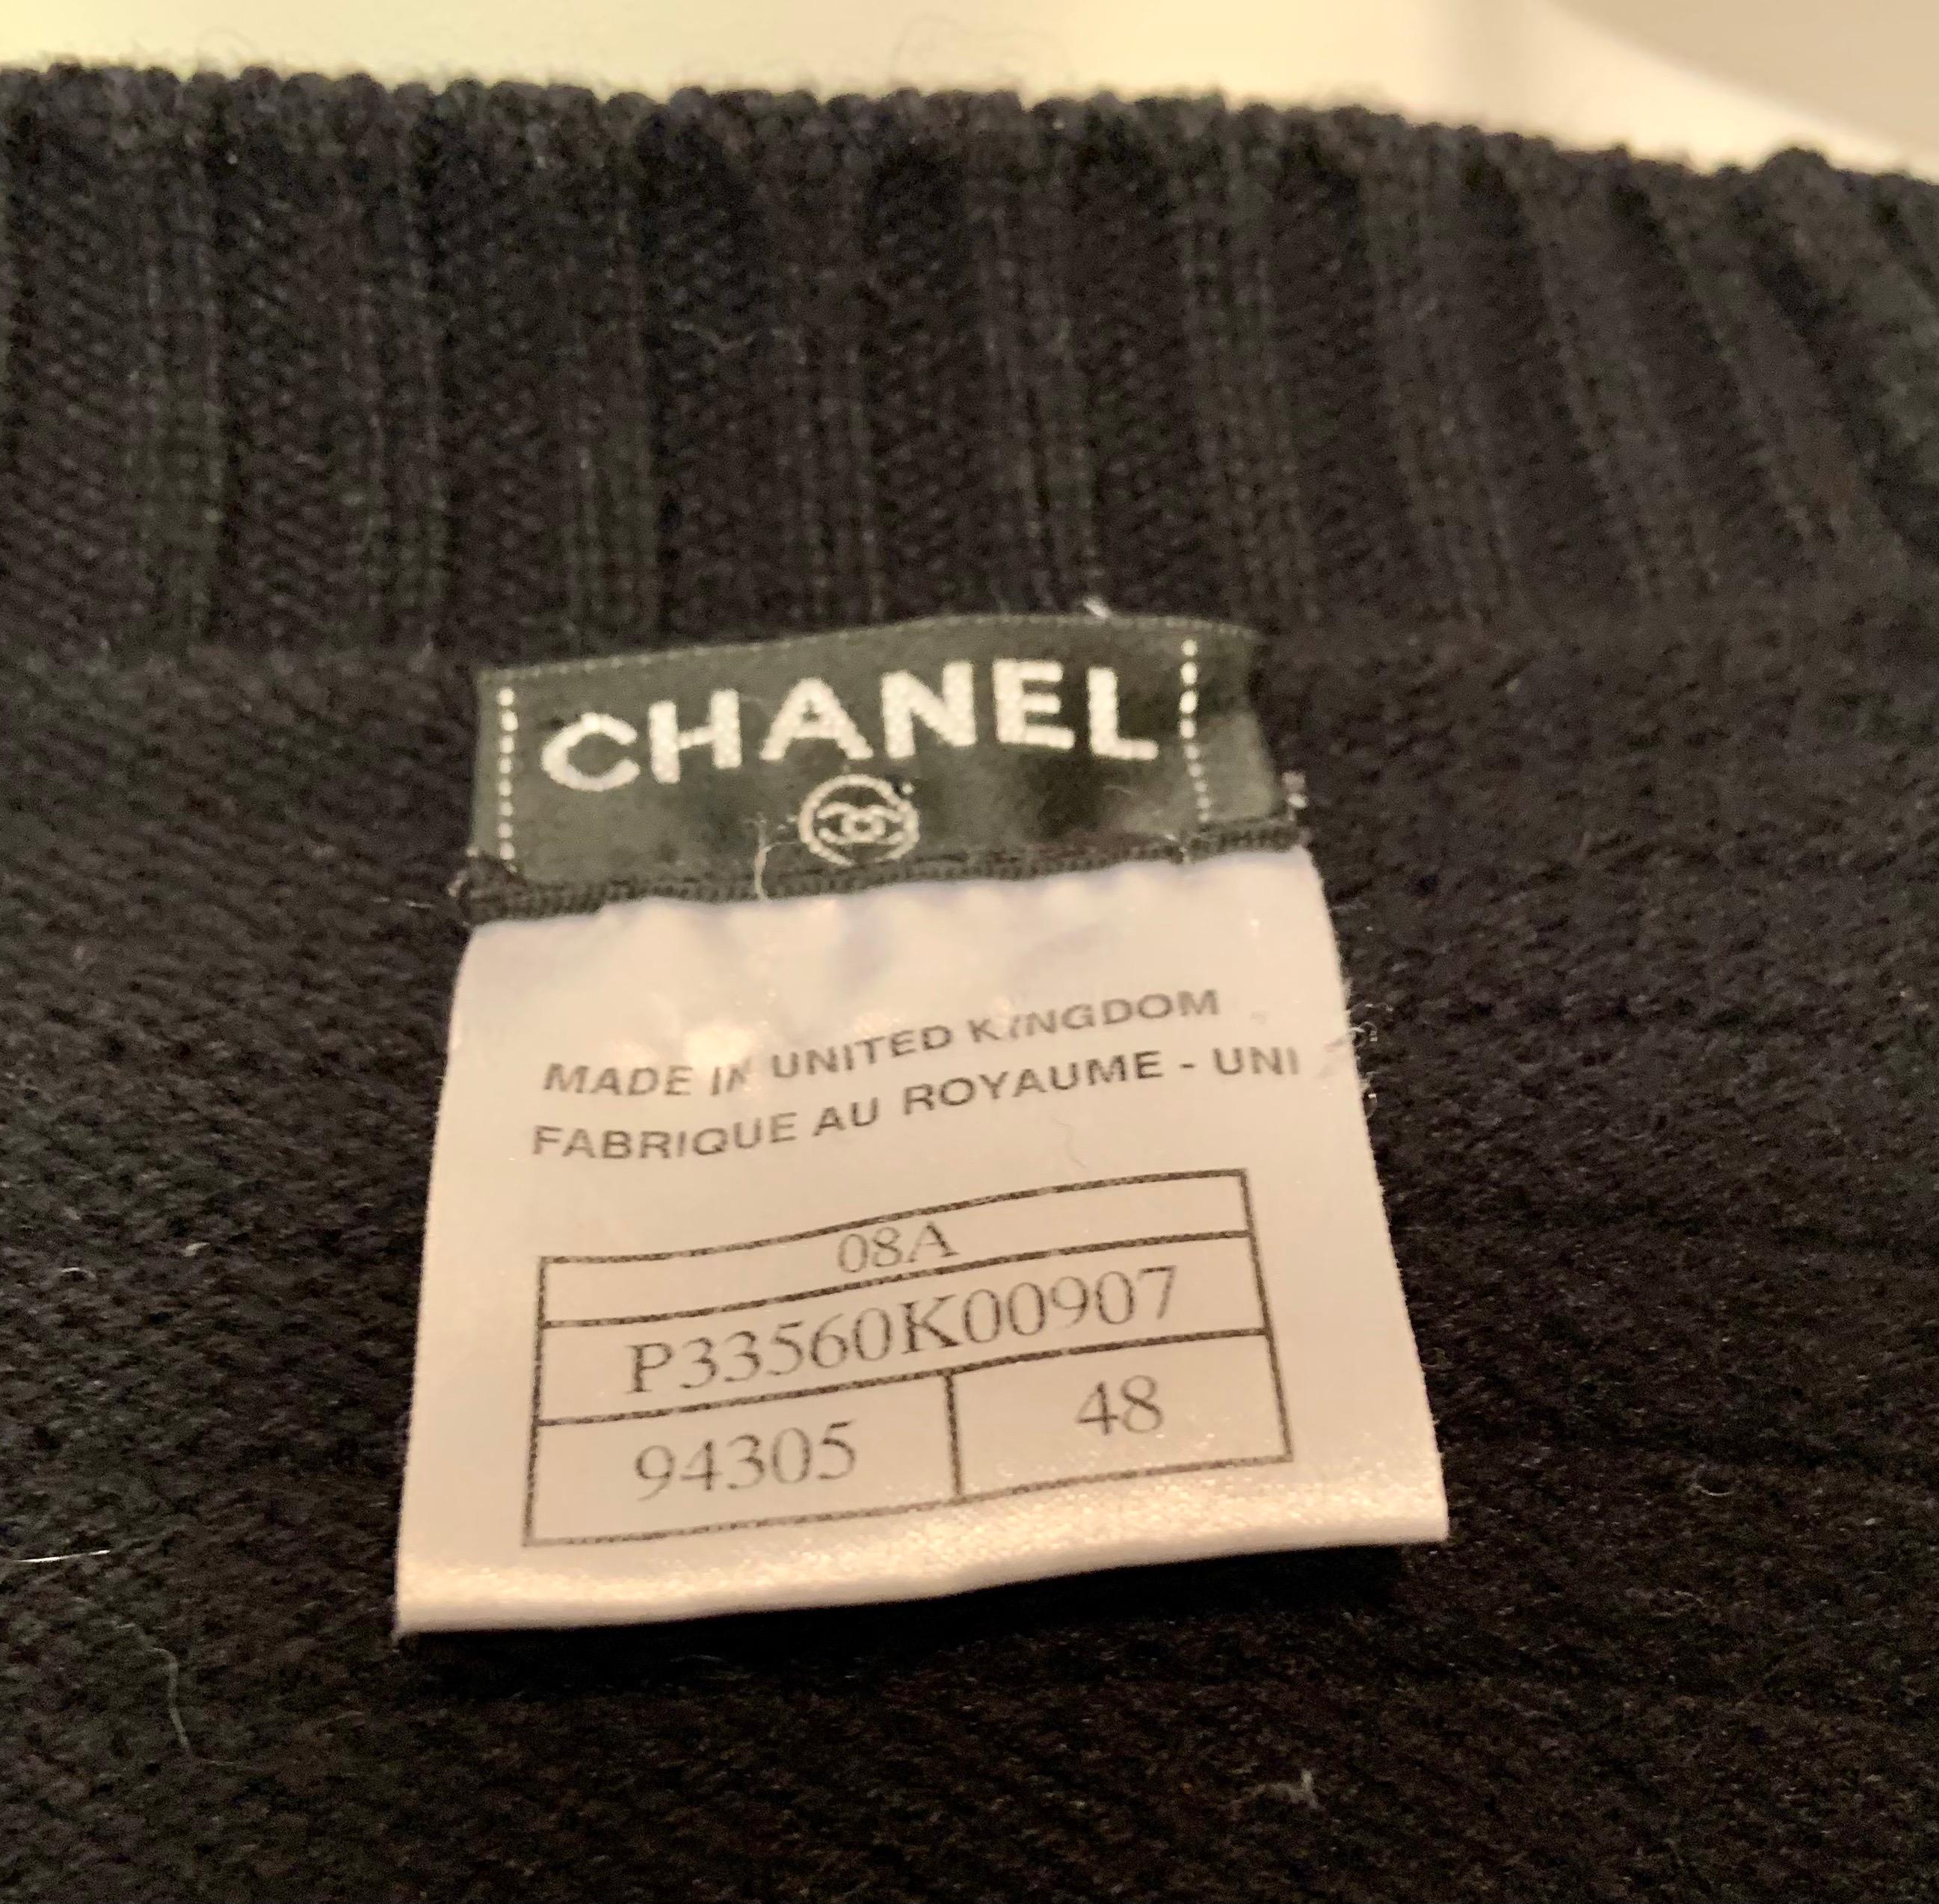 Chanel Black Cashmere Long Cardigan Sweater, Larger Size 12